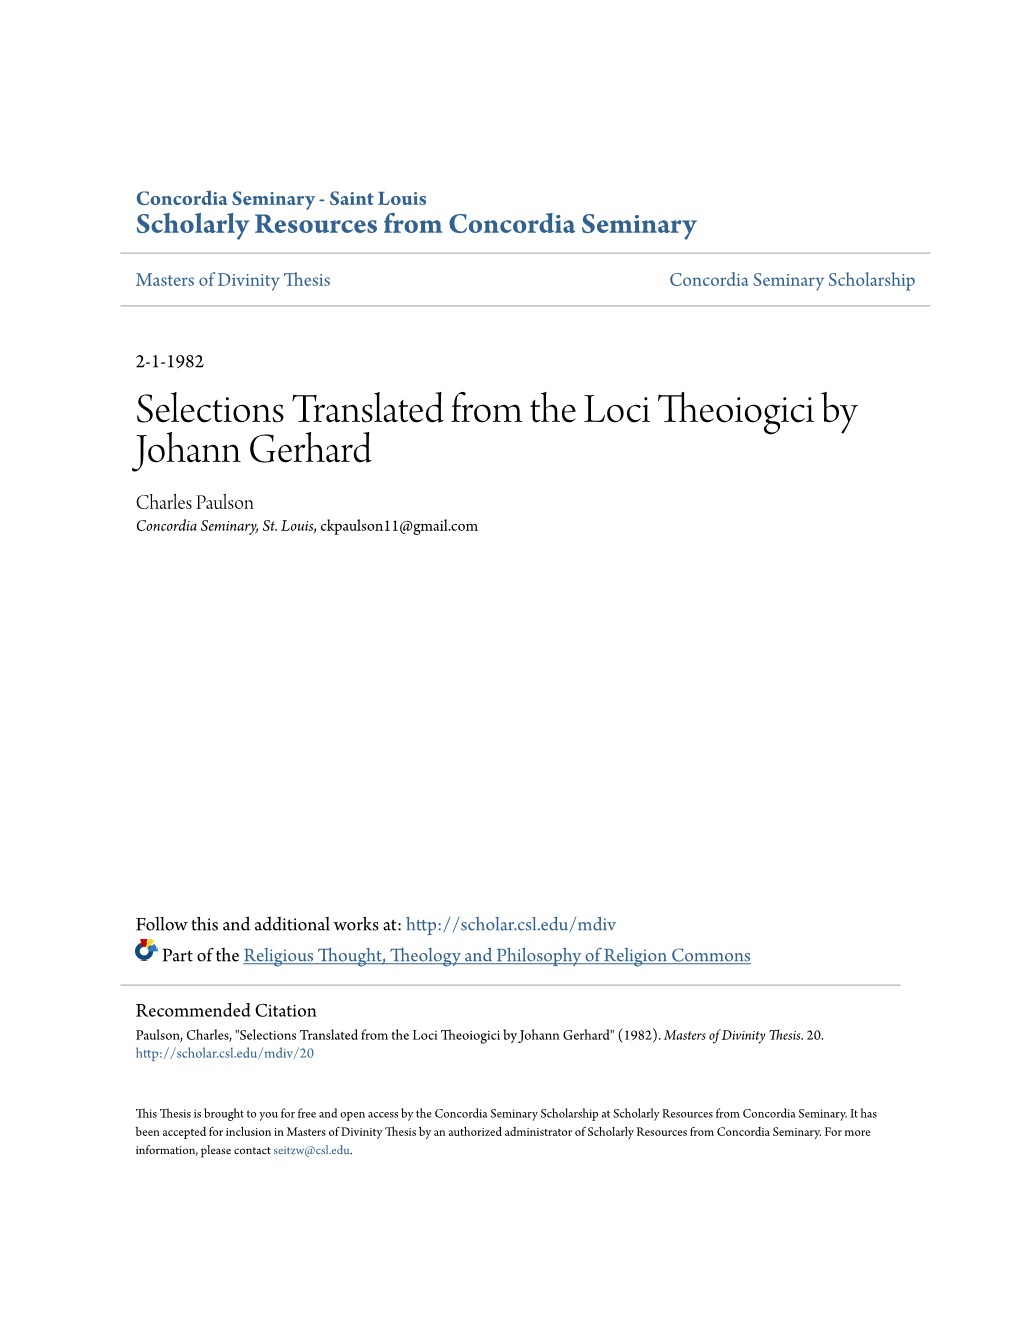 Selections Translated from the Loci Theoiogici by Johann Gerhard Charles Paulson Concordia Seminary, St